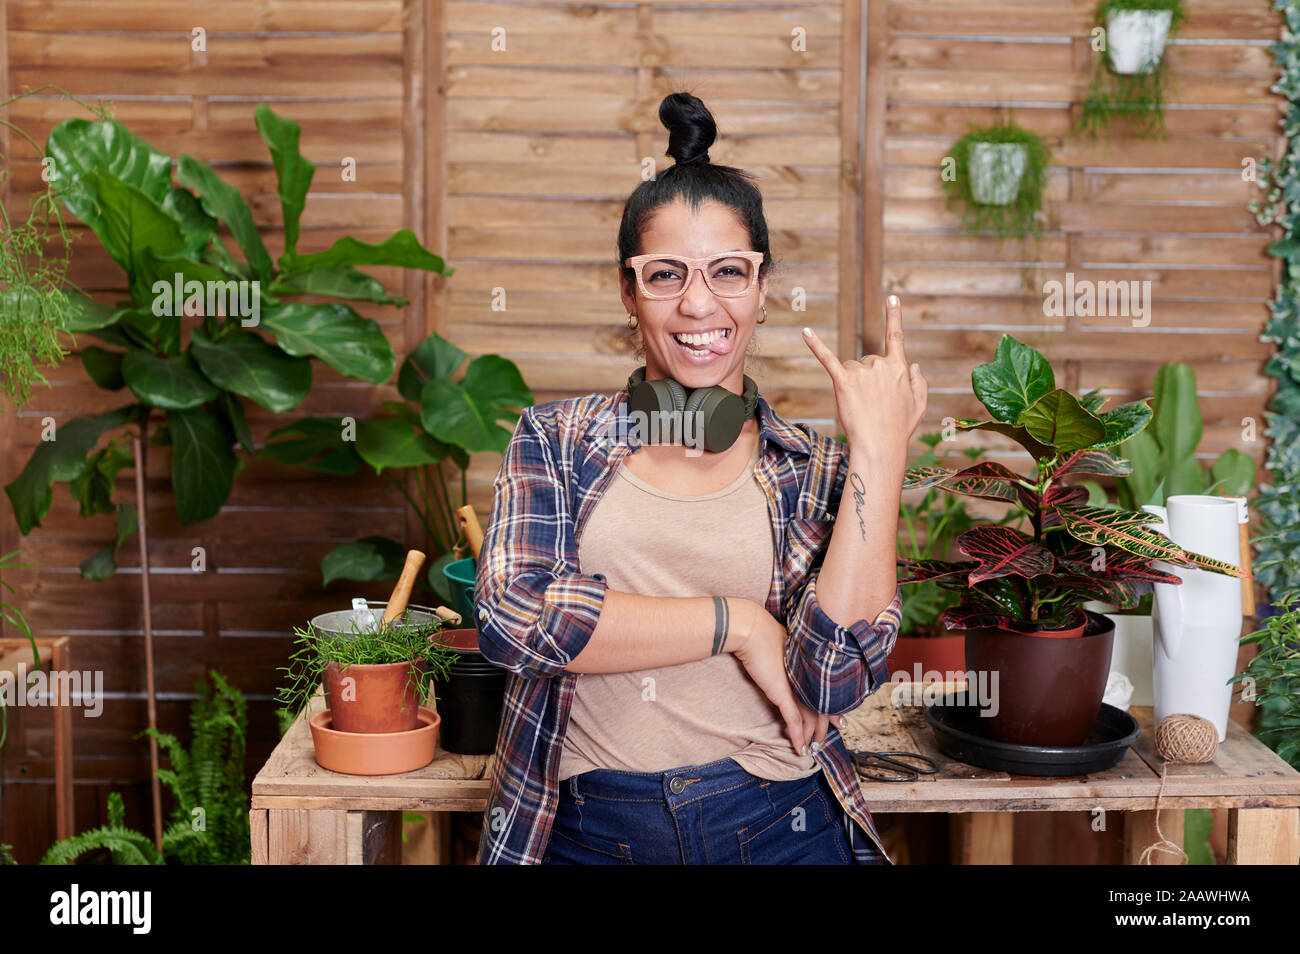 Portrait of a happy young woman gardening on her terrace Stock Photo